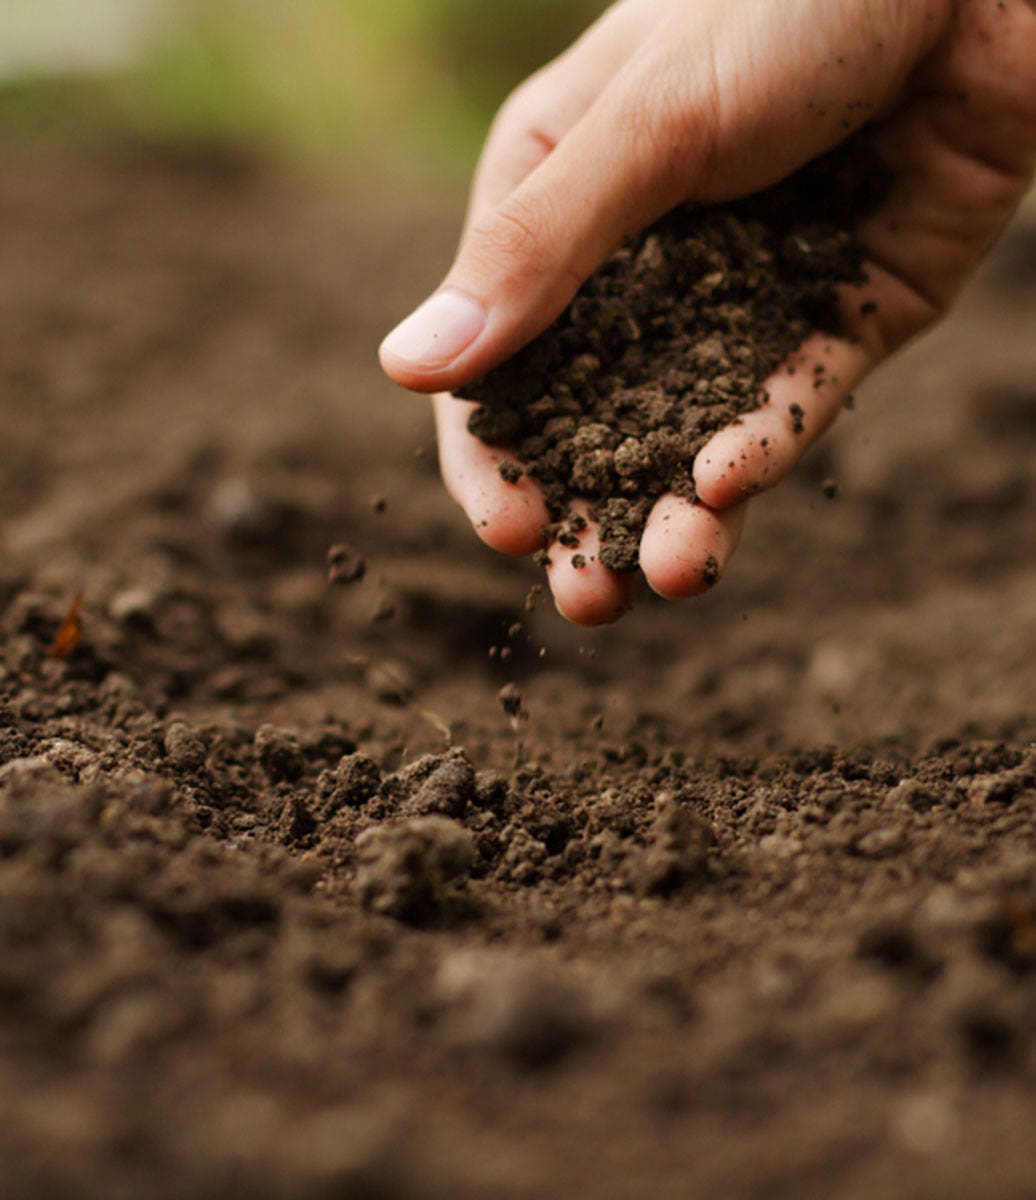 Image of a hand inspecting soil